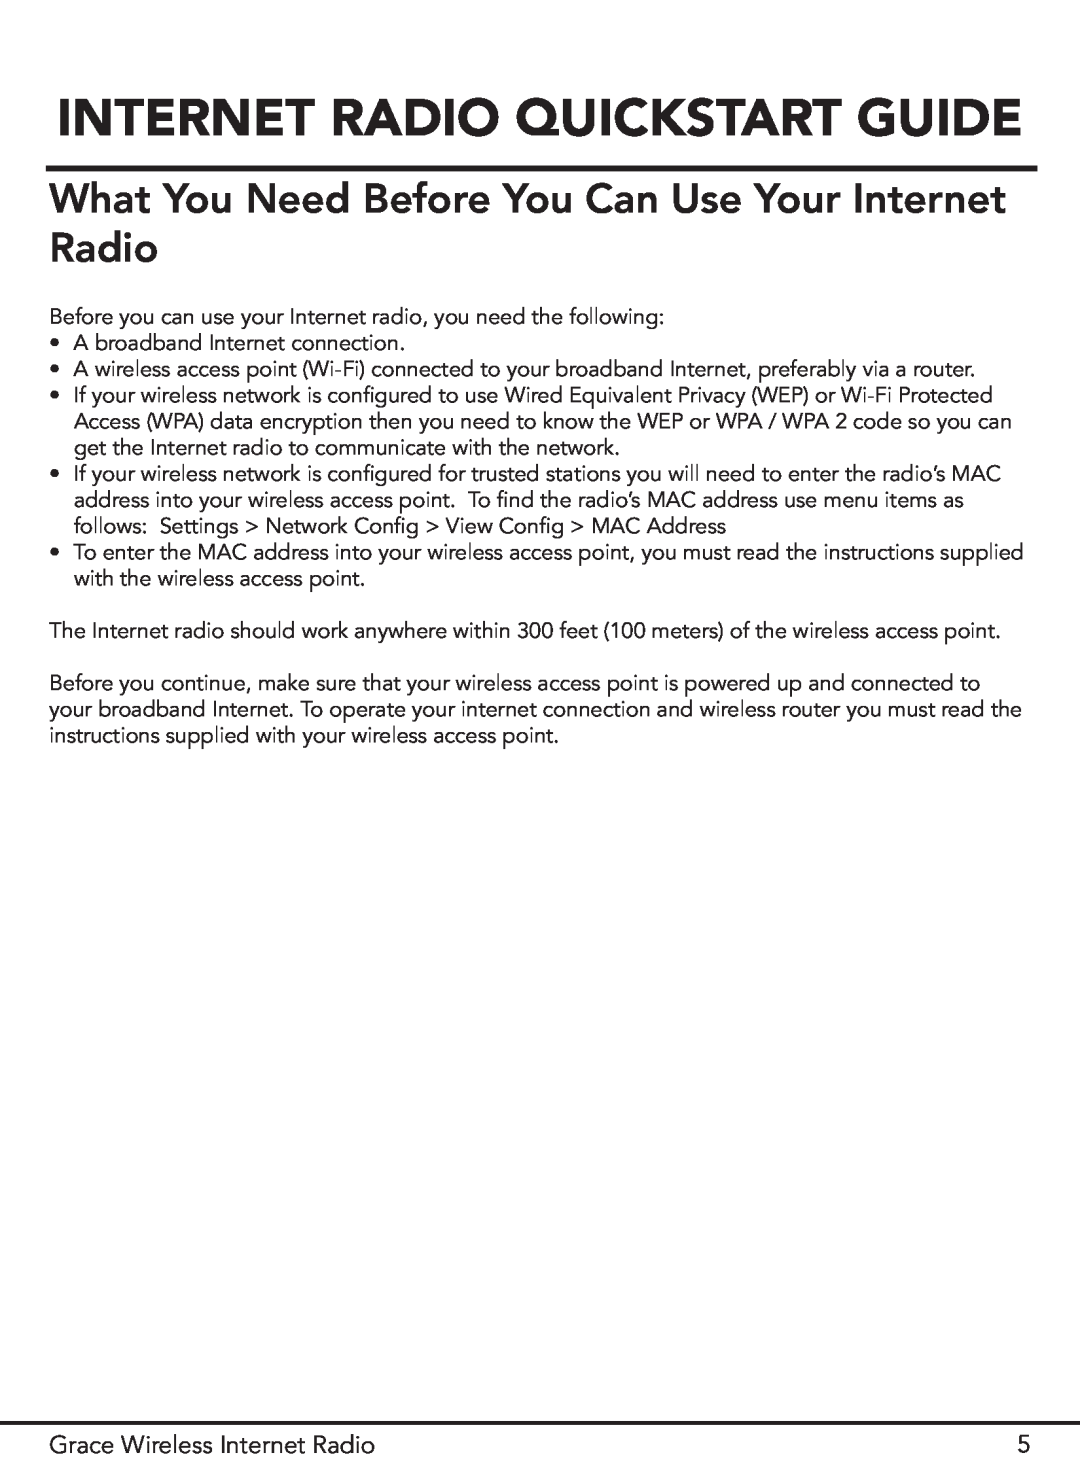 Grace GDI-IR2000 manual Internet Radio Quickstart Guide, What You Need Before You Can Use Your Internet Radio 